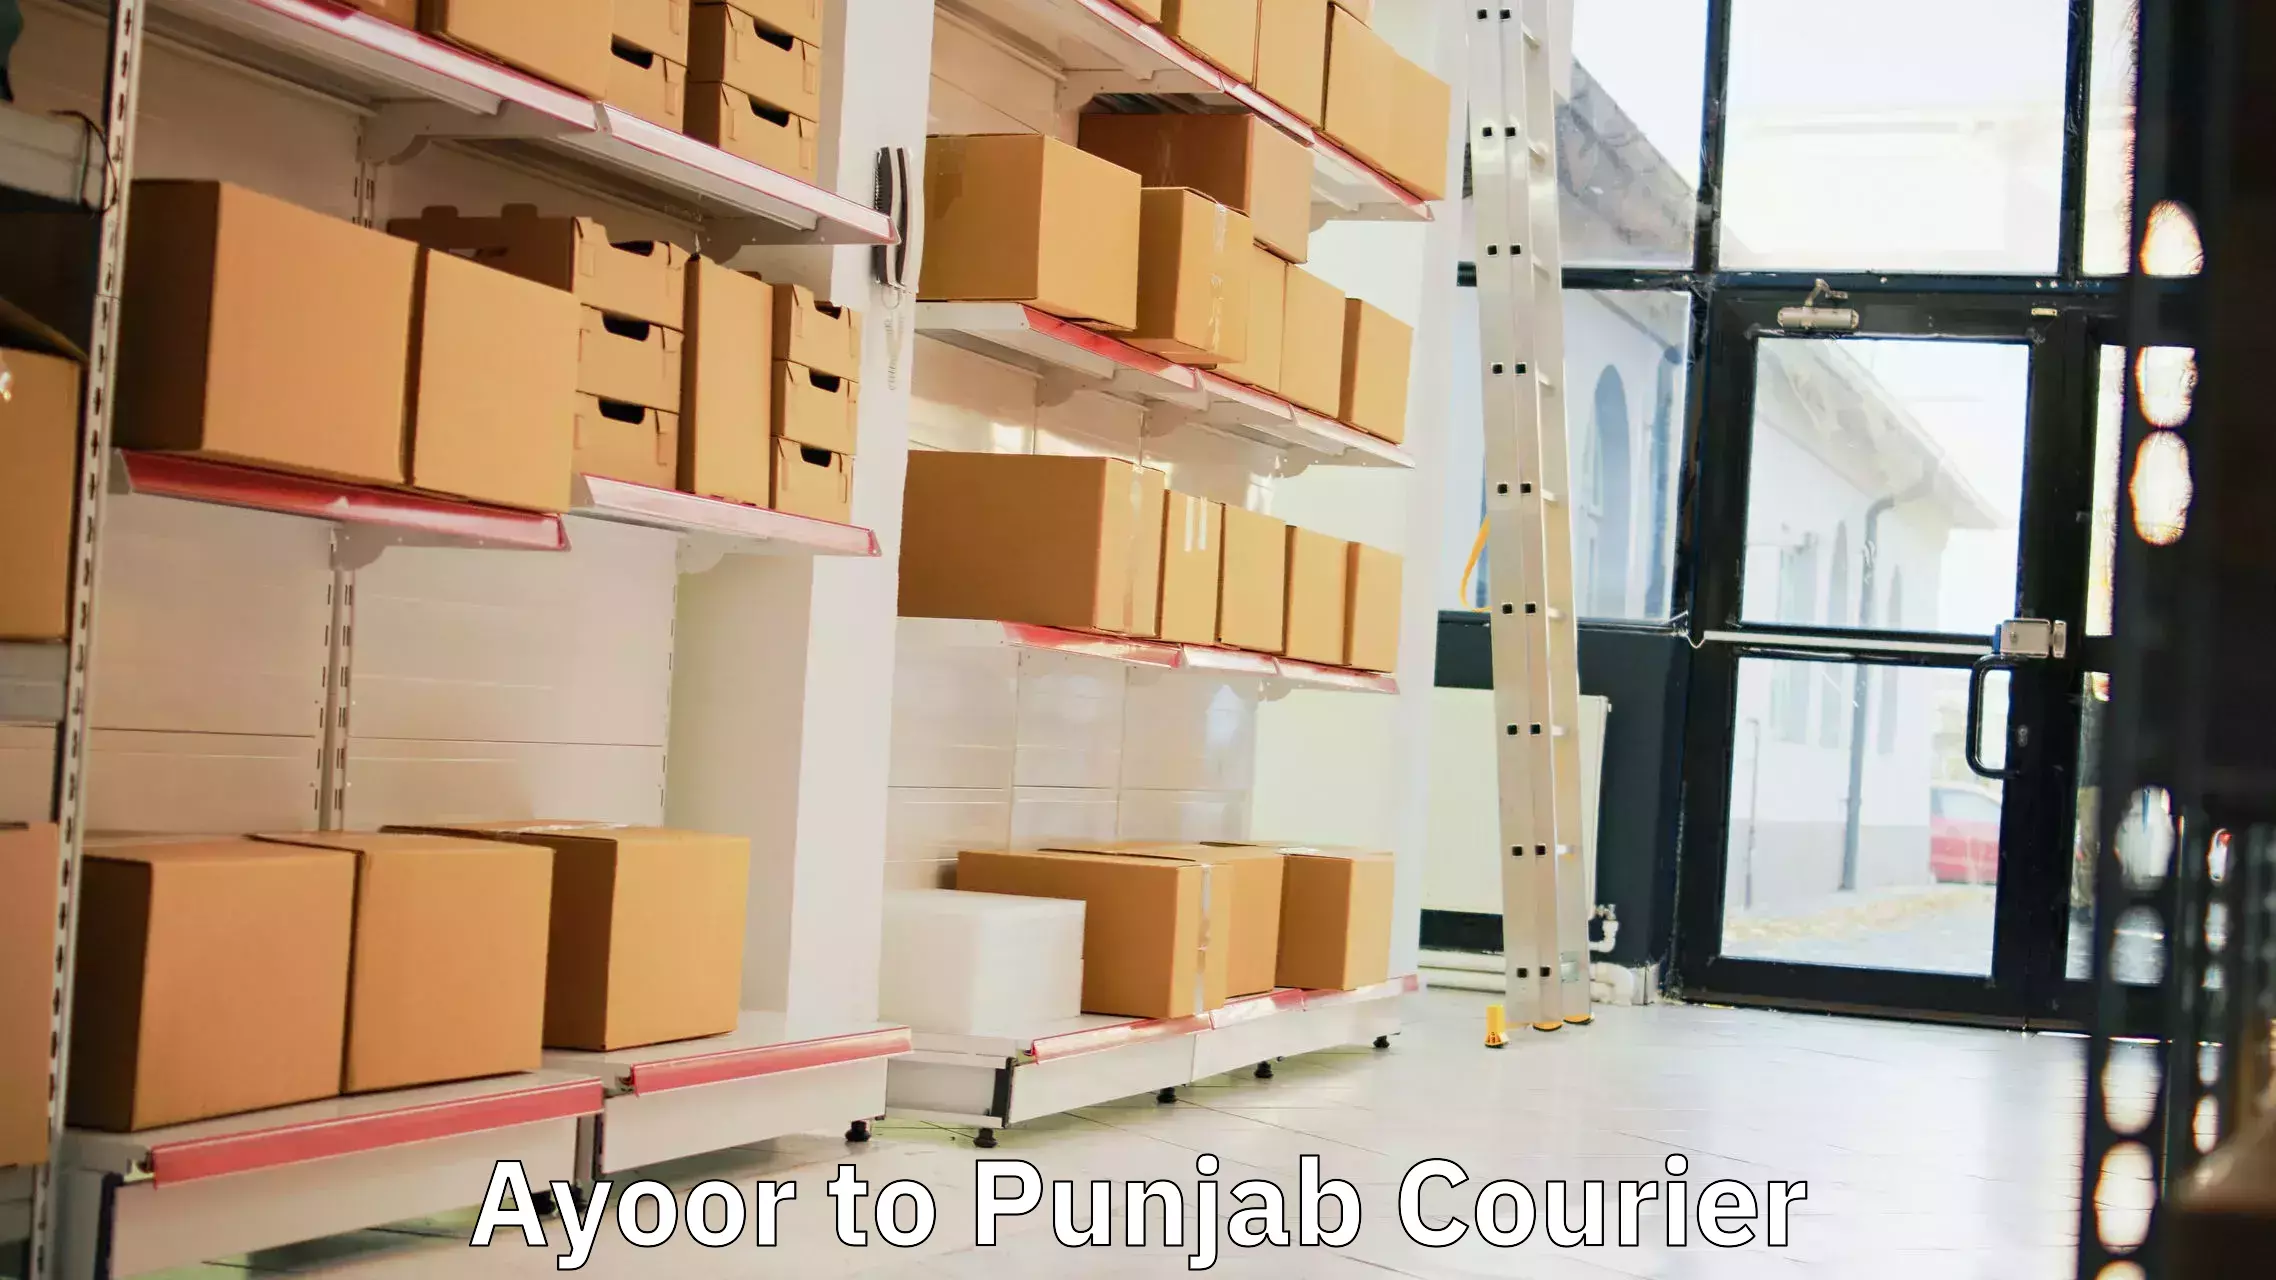 Same-day delivery options Ayoor to Punjab